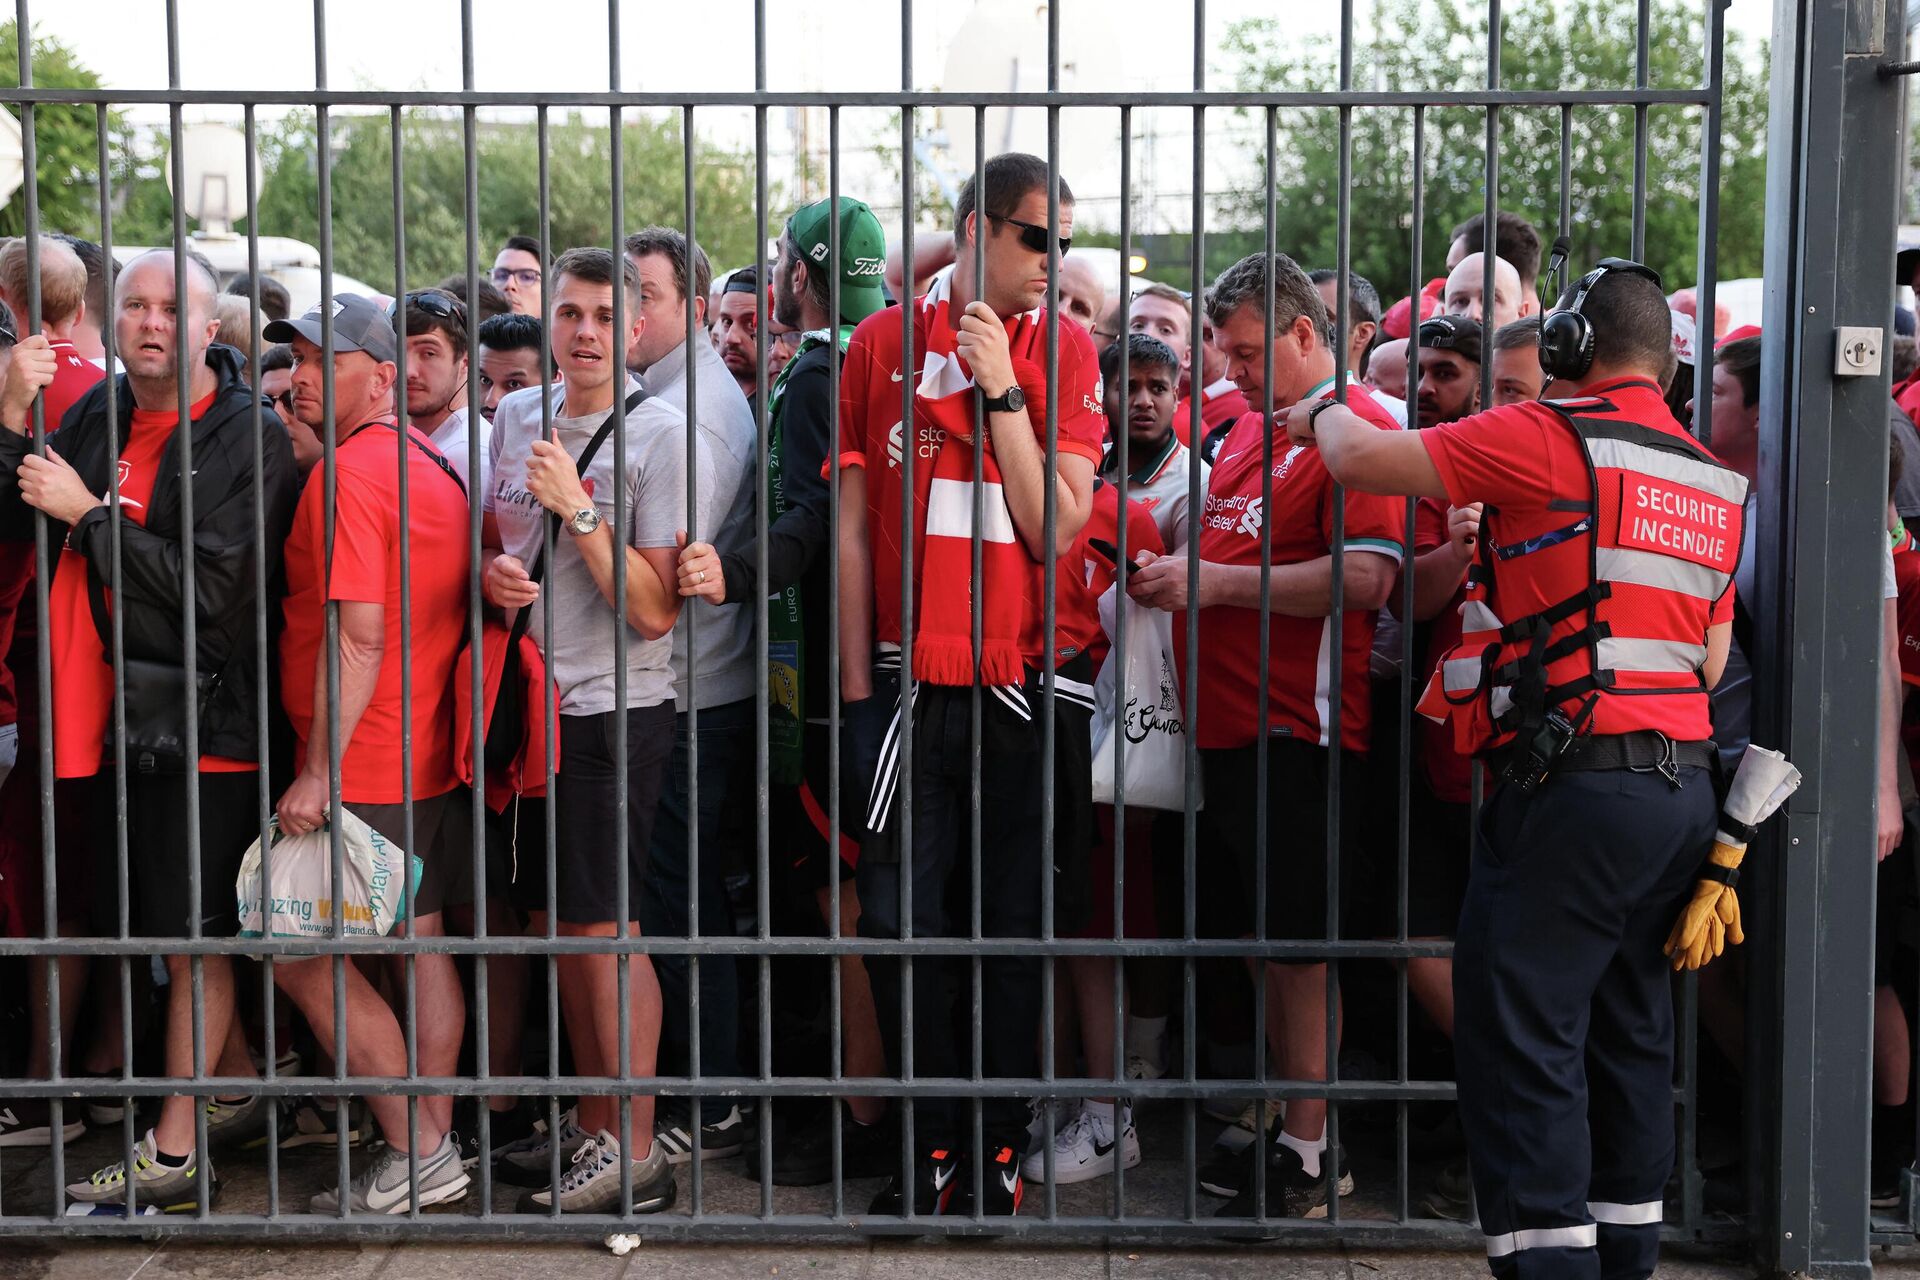 Liverpool fans stand outside unable to get in in time leading to the match being delayed prior to the UEFA Champions League final football match between Liverpool and Real Madrid at the Stade de France in Saint-Denis, north of Paris, on May 28, 2022 - Sputnik International, 1920, 01.06.2022